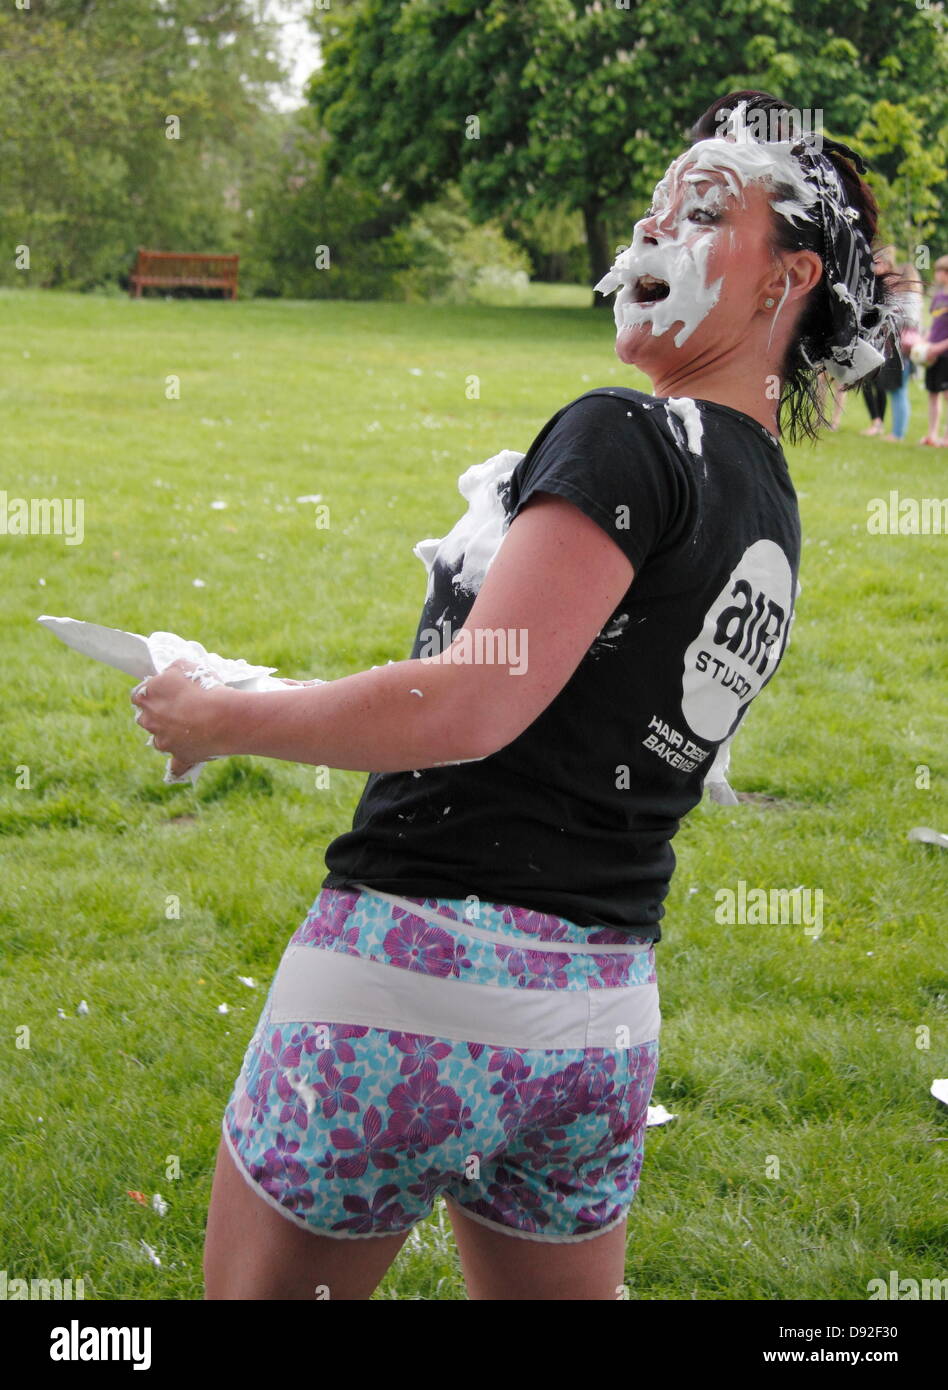 Bakewell, Derbyshire, UK. 9 June 2013.  Paula Sutherill from the winning all-girls team takes a custard pie hit at the Mr. Darcy Custard Pie Fight, Bakewell Baking Festival, Derbyshire, UK.  Mr Darcy's Custard Pie Fight marked the 200th anniversary of Jane Austen's Pride and Prejudice that was part-written in Bakewell's Rutland Arms Hotel.  Teams, with one member dressed as Mr. Darcy, launched pies whilst attempting to keep their Darcy clean.  An all-girl team from Matlock was declared winner. Credit:  Deborah Vernon/Alamy Live News Stock Photo